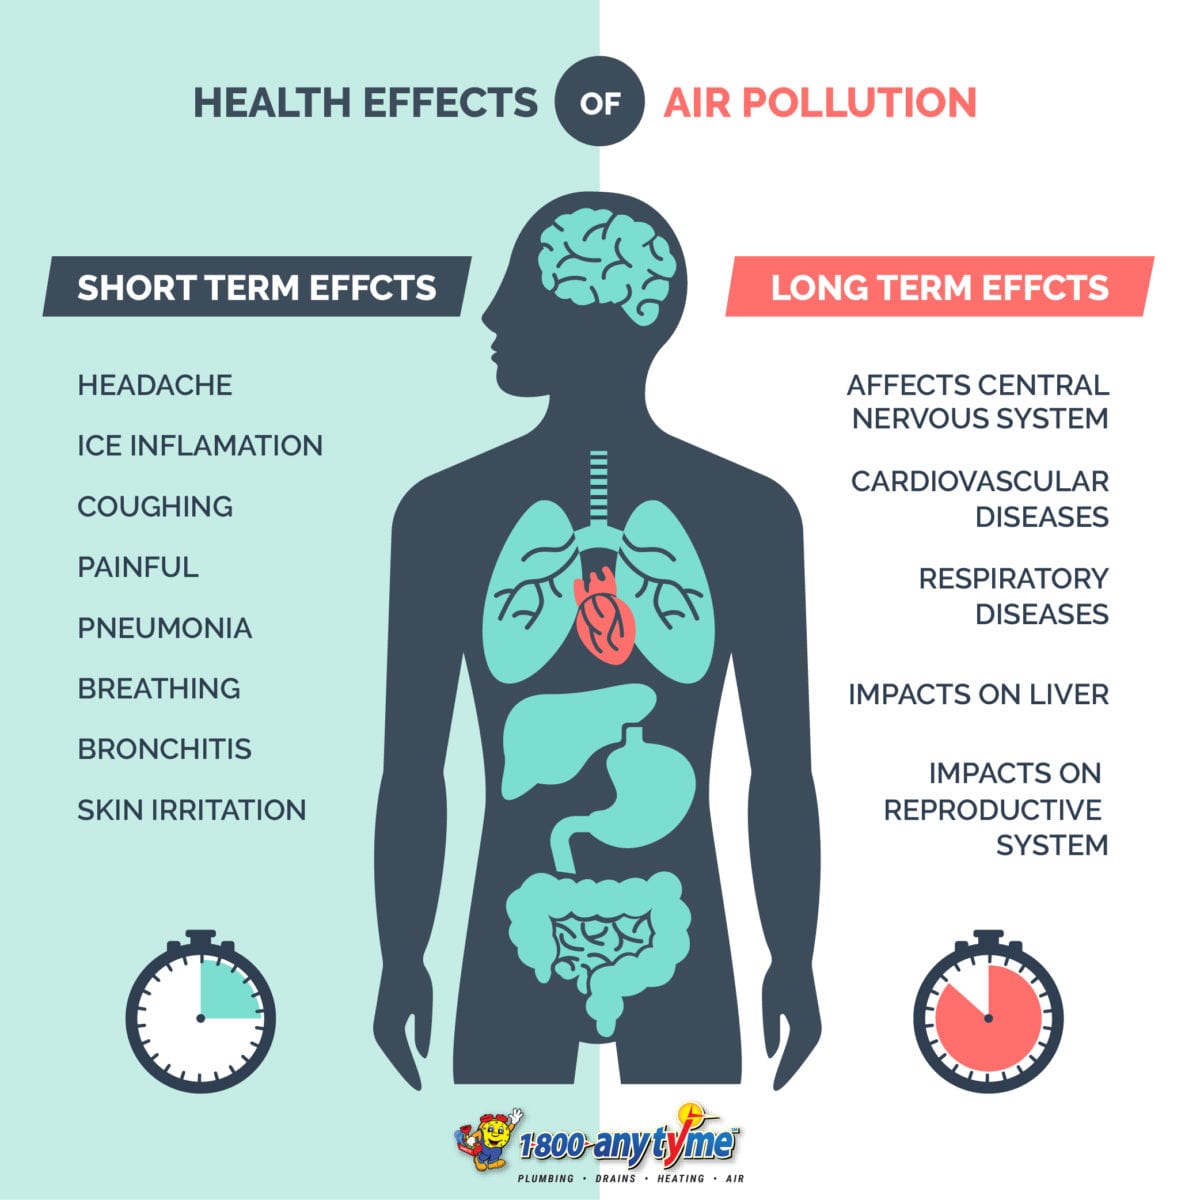 https://1800anytyme.com/wp-content/uploads/2019/10/pollution-on-human-body-infographic.jpg